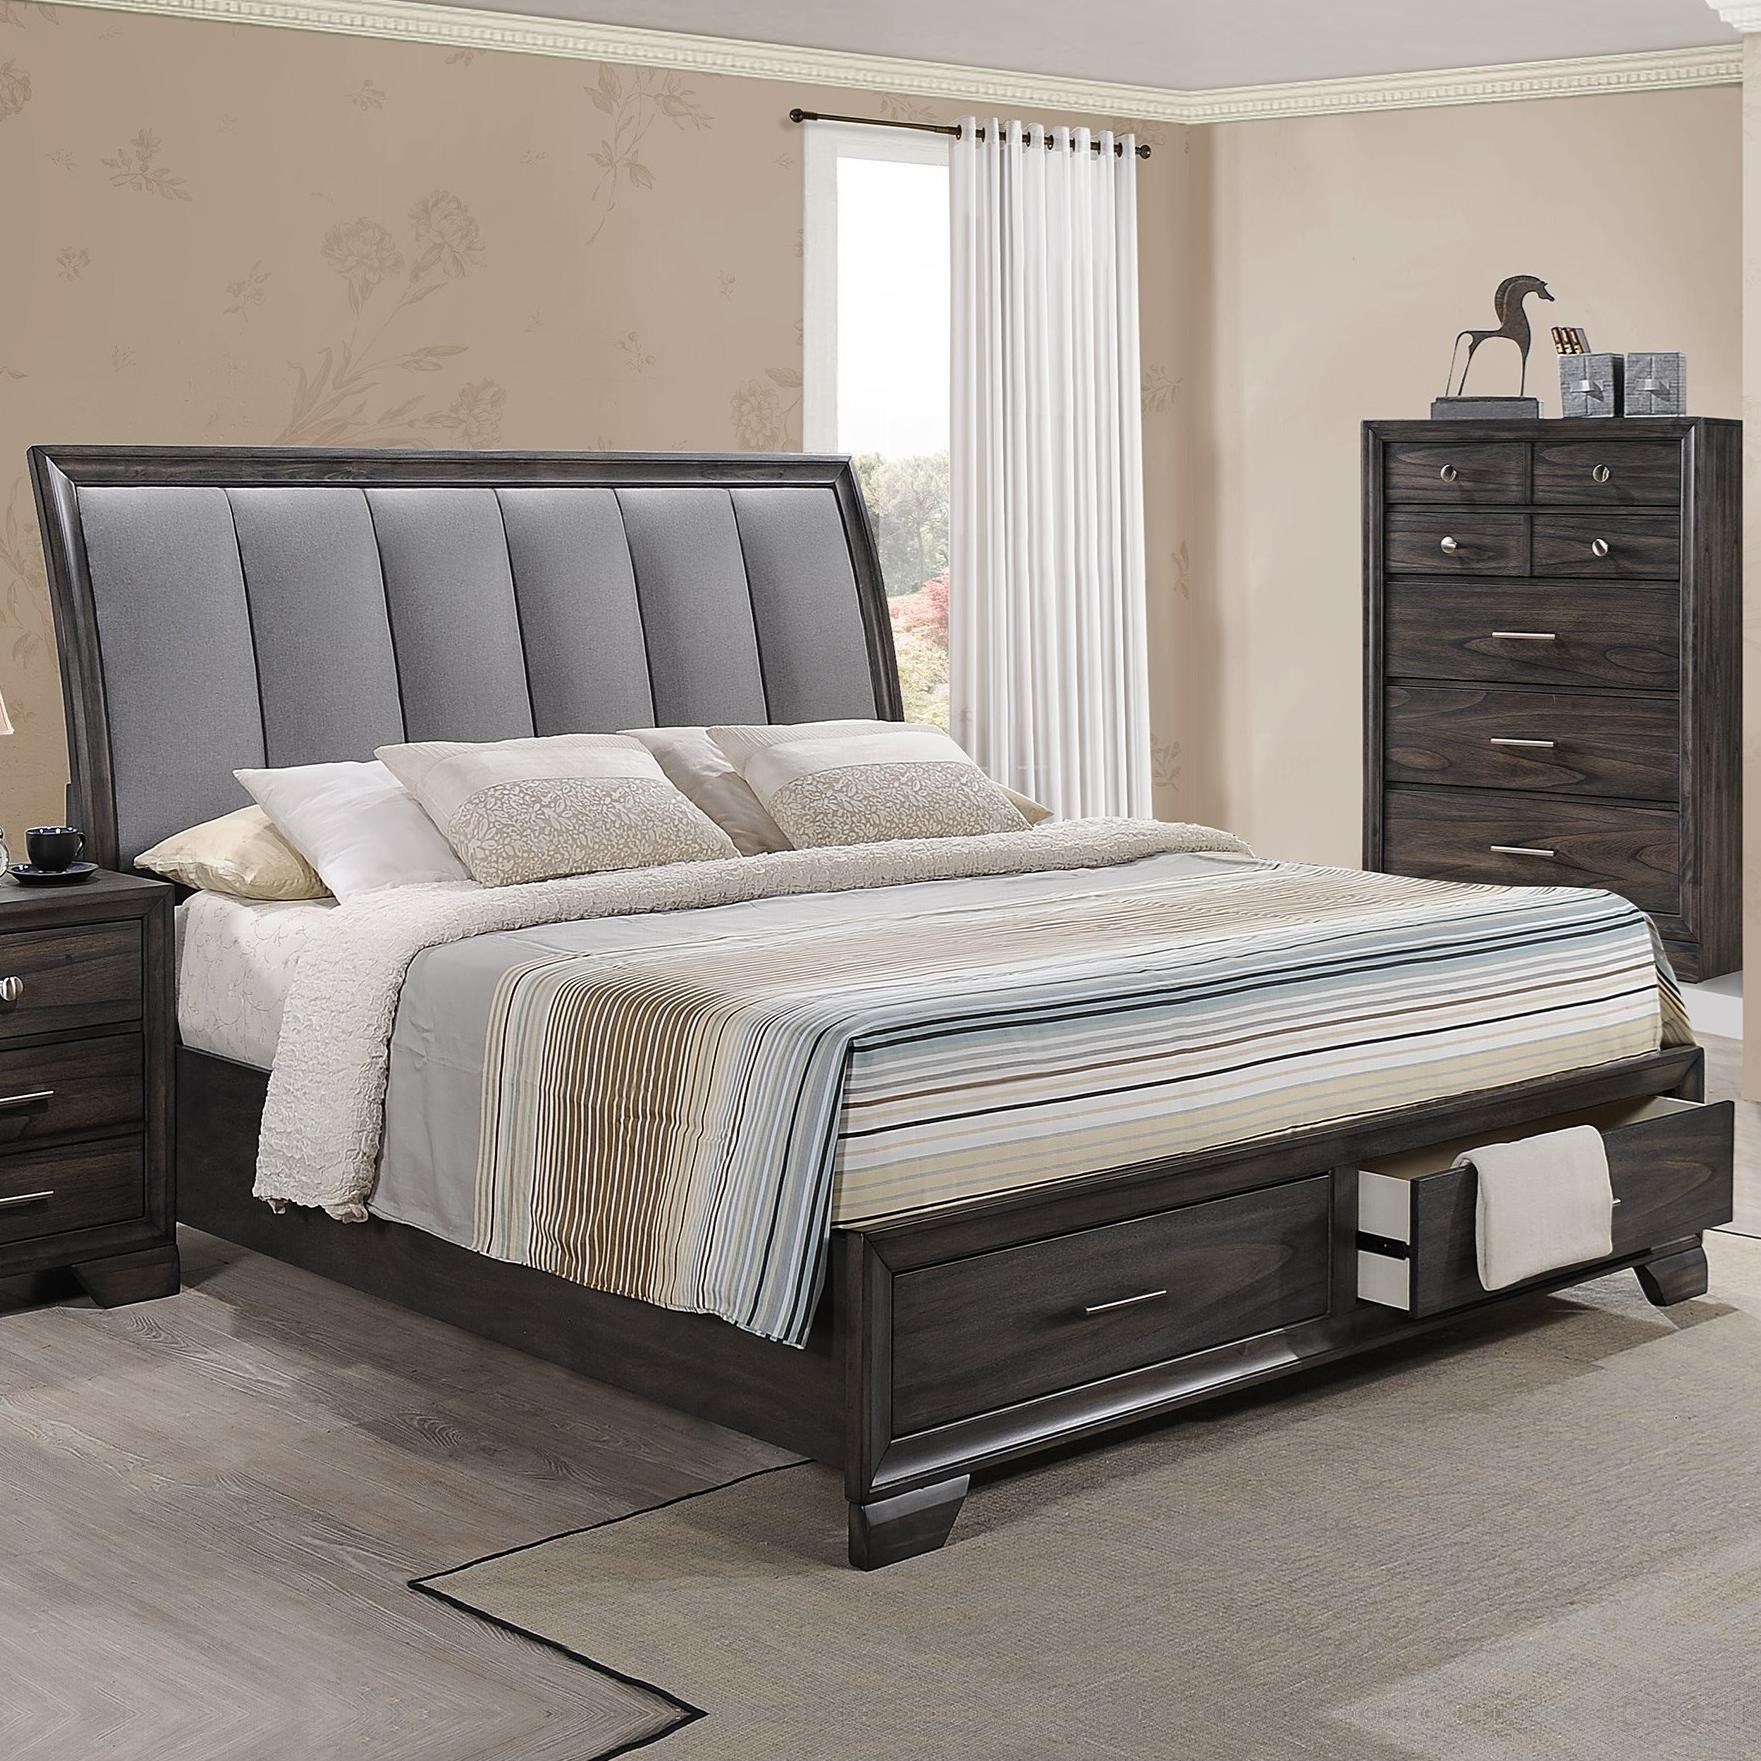 Hs Contemporary 4pc Queen Upholstered, Queen Bed With Headboard Storage And Drawers